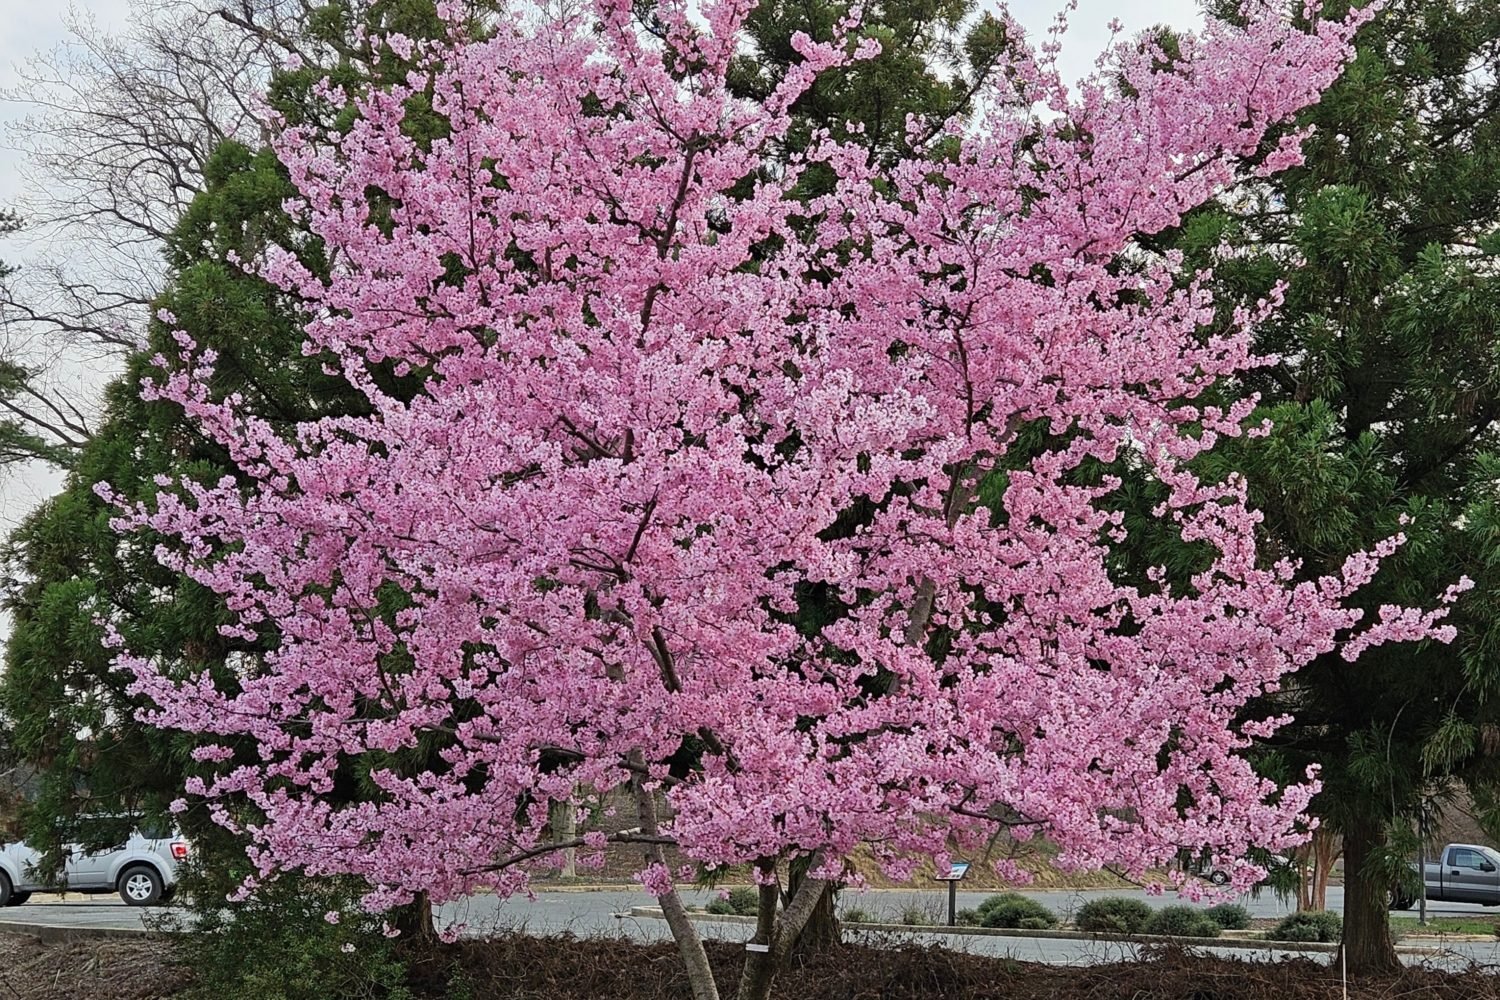 The Helen Taft varietal is currently in bloom at the Arboretum. Photo courtesy of US National Arboretum.